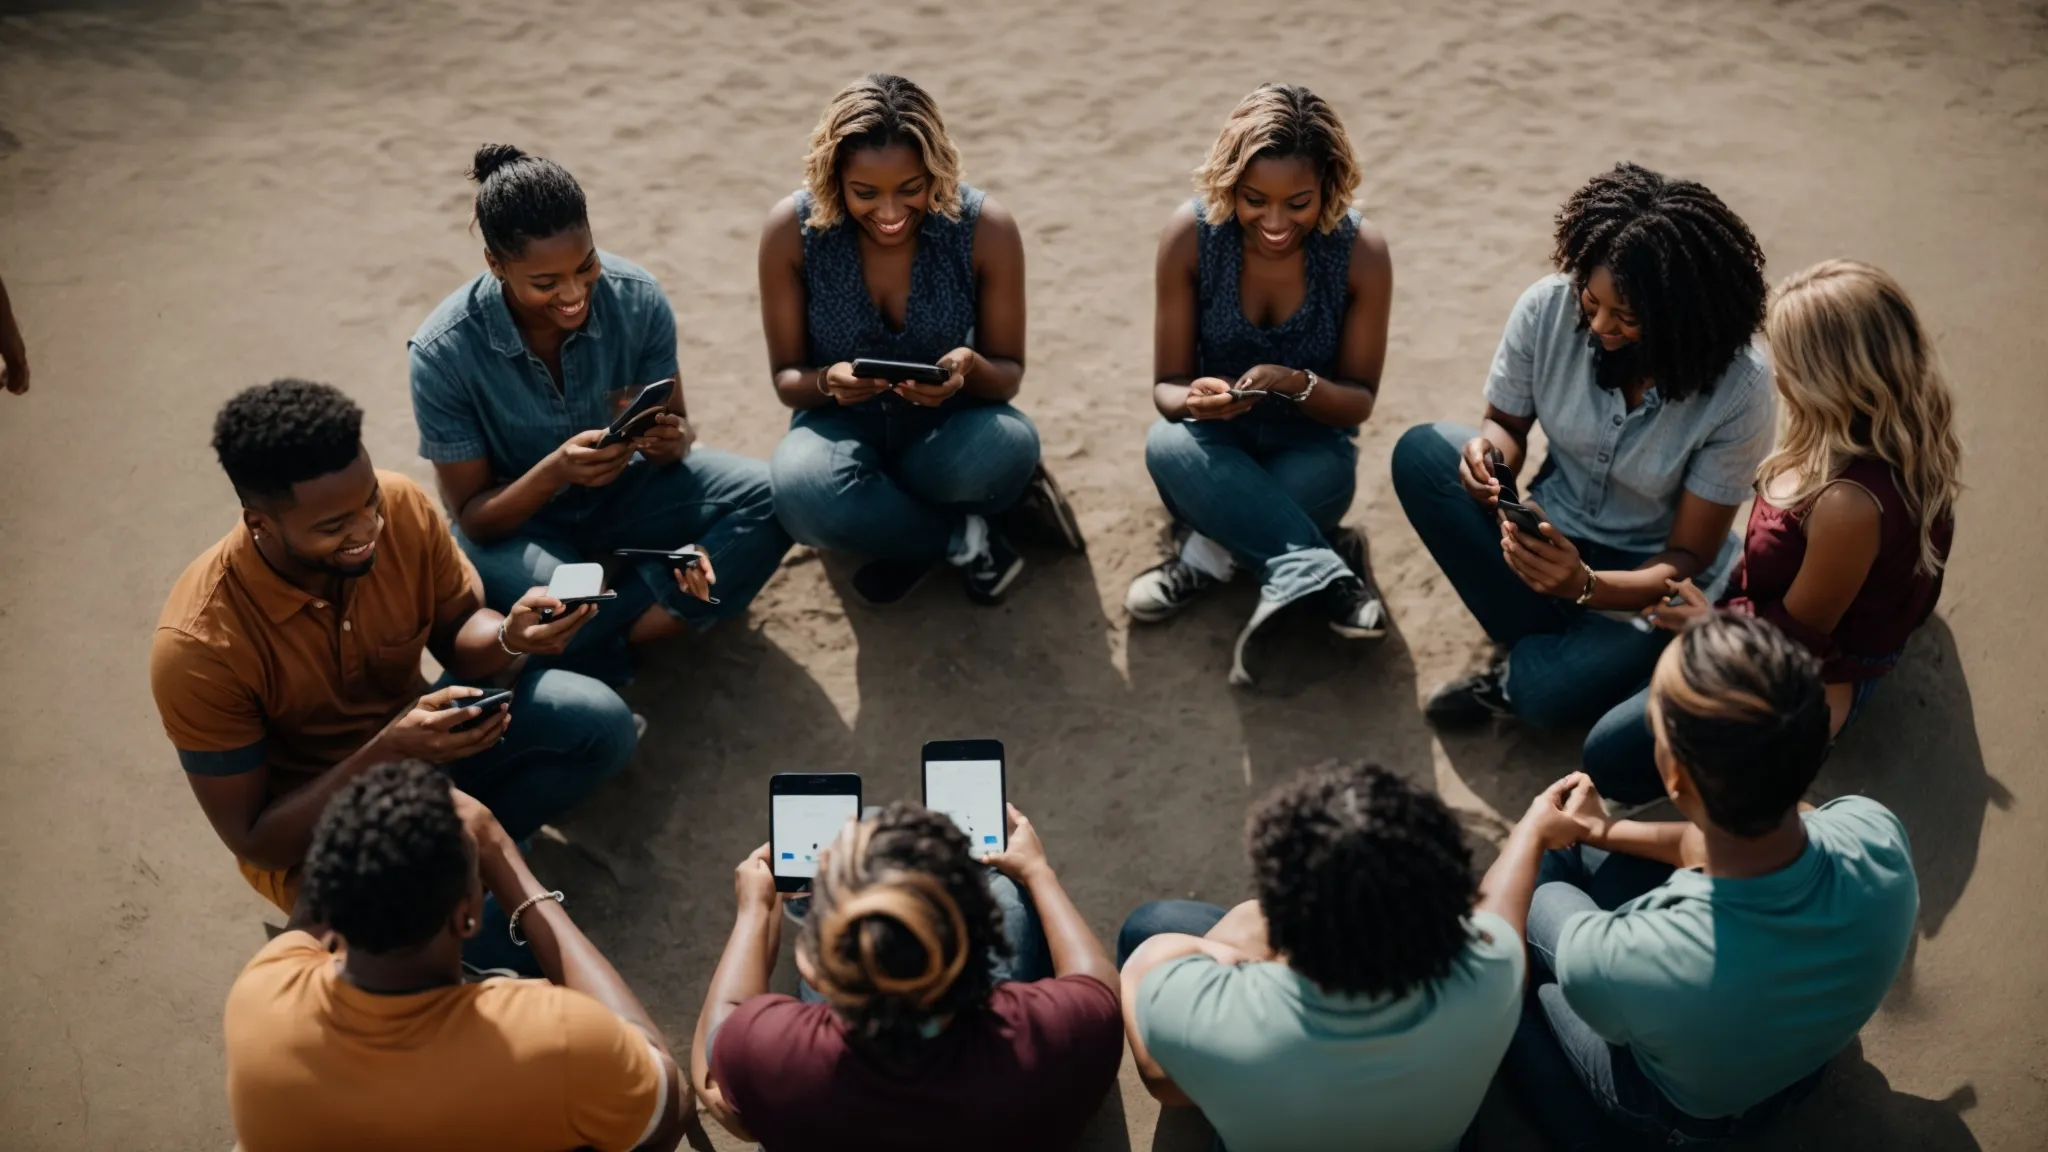 a group of diverse people sitting in a circle, each looking at their own smartphones and tablets, with expressions of engagement and smiles.